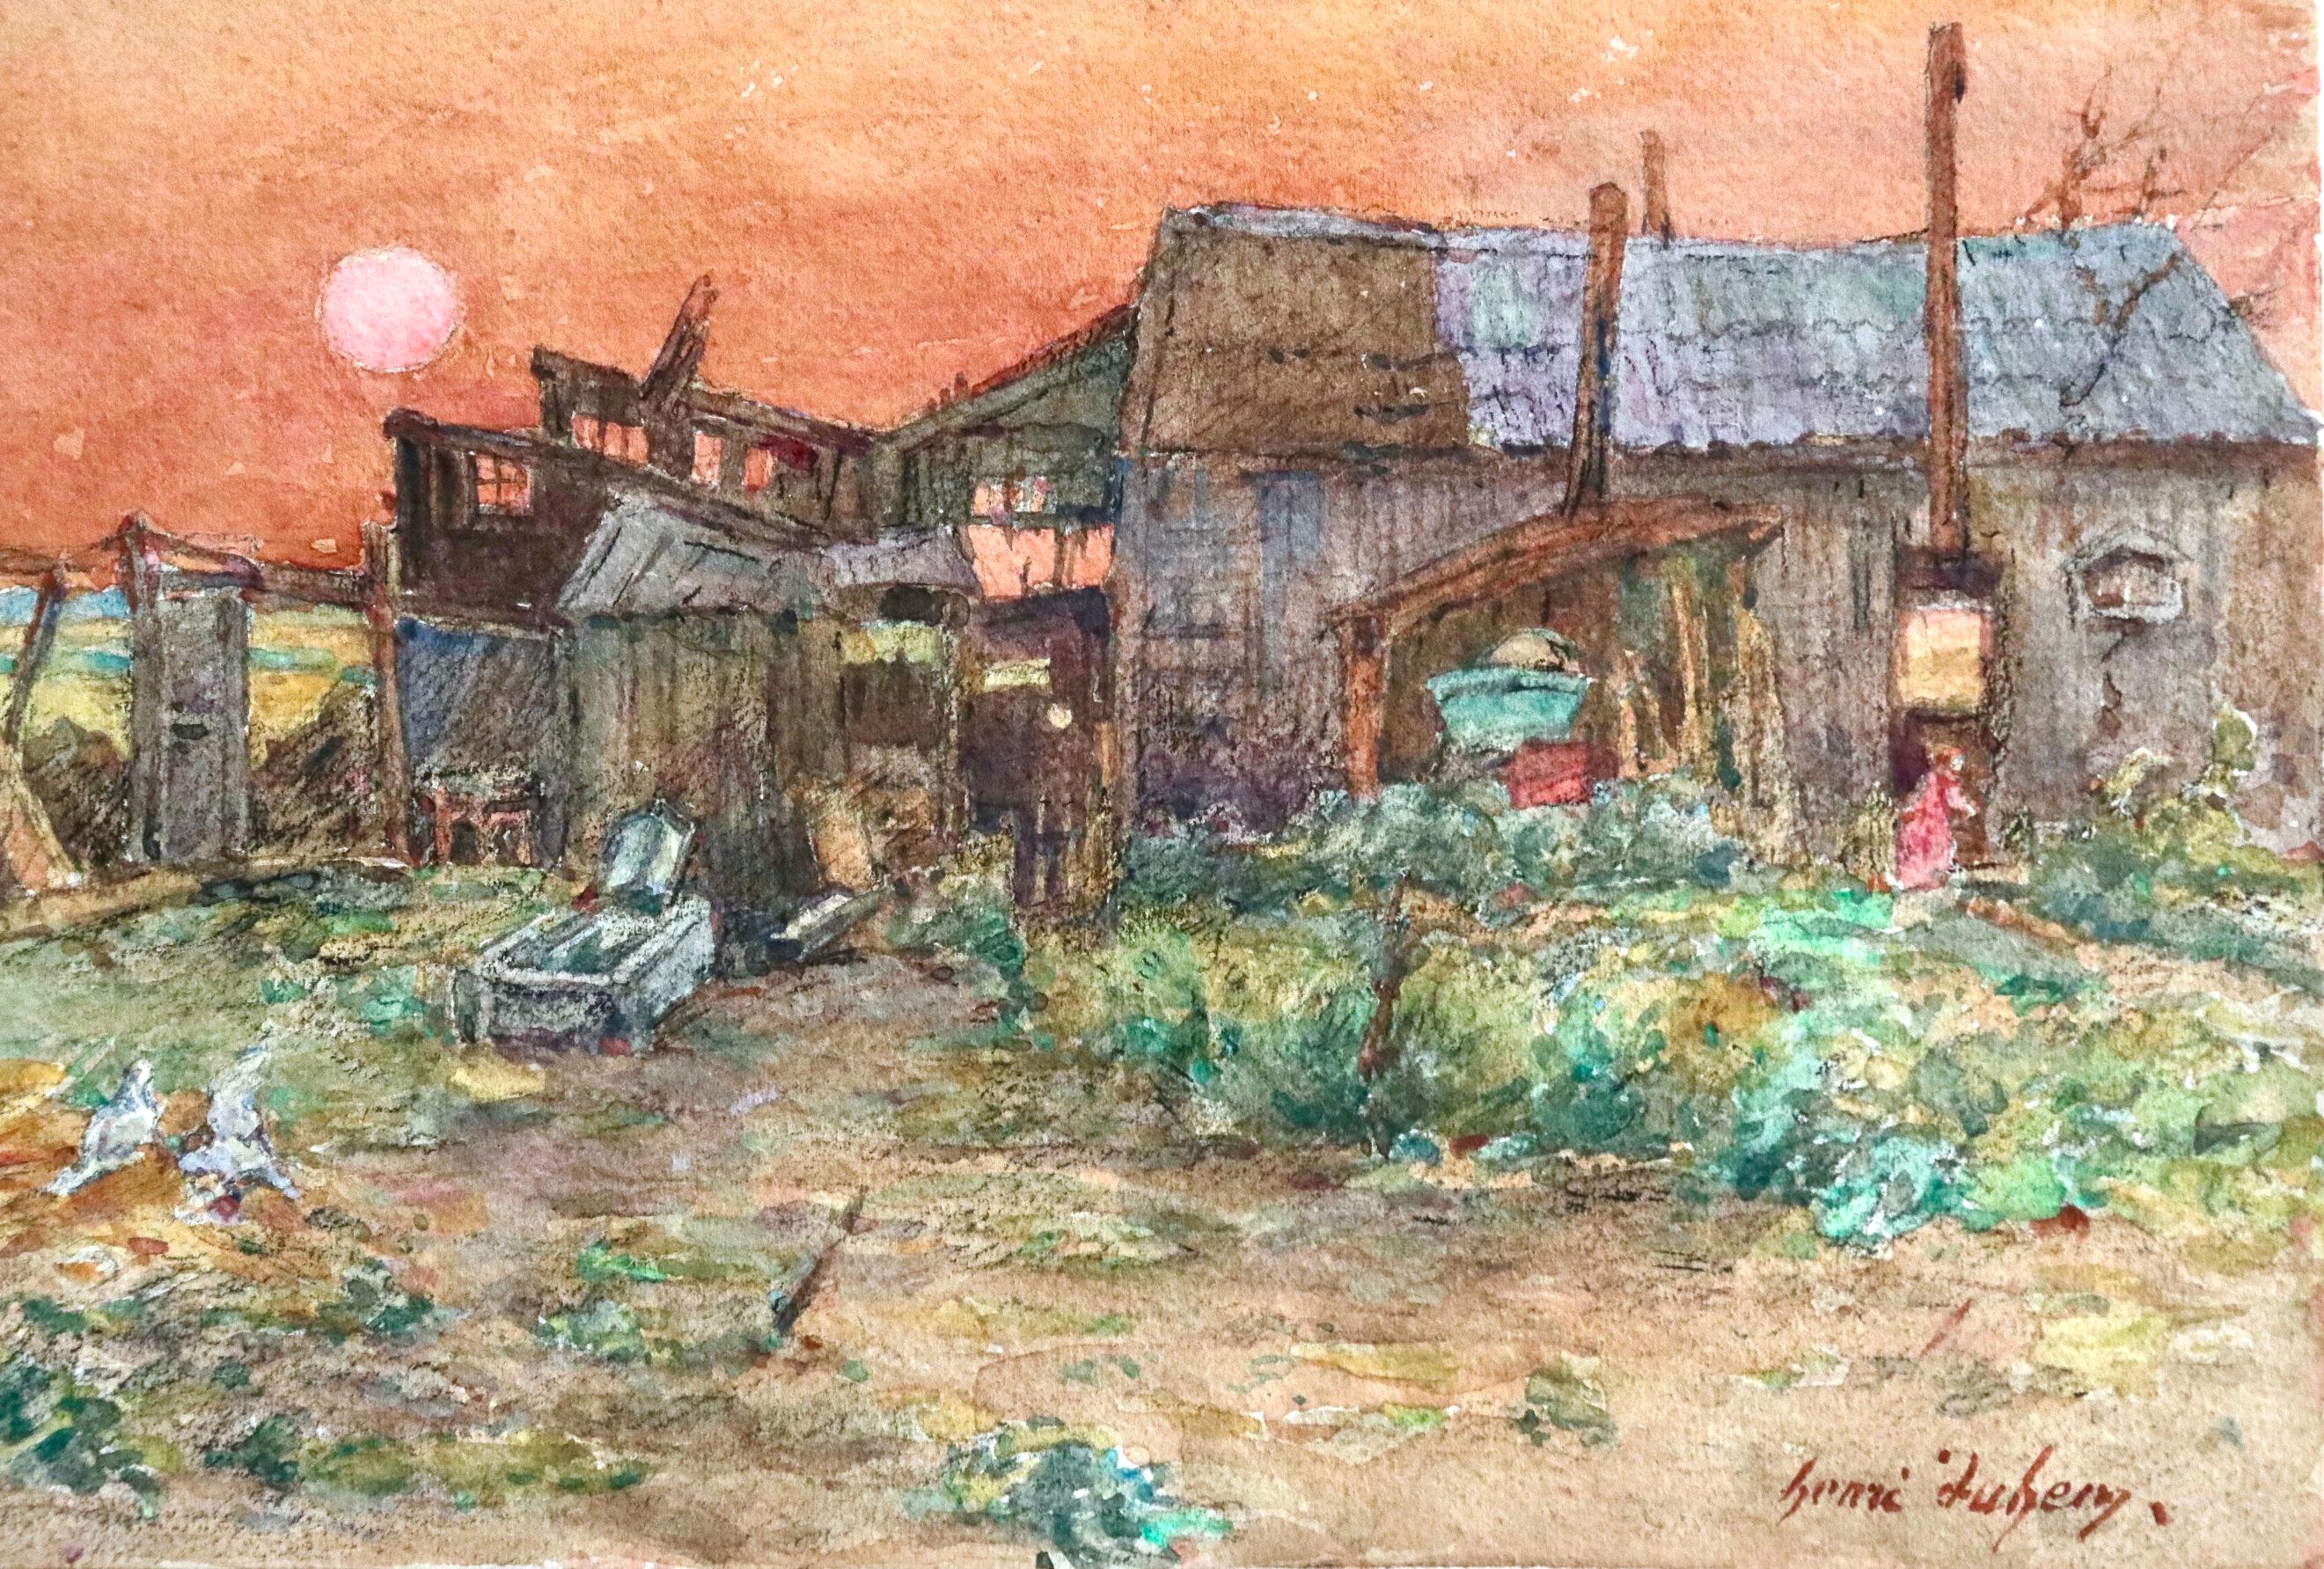 Watercolour on paper circa 1925 depicting a young girl running through a farmyard as the sun sets red in the distance. Signed lower right. This painting is not currently framed but a suitable frame can be sourced if required.

Descendant of an old